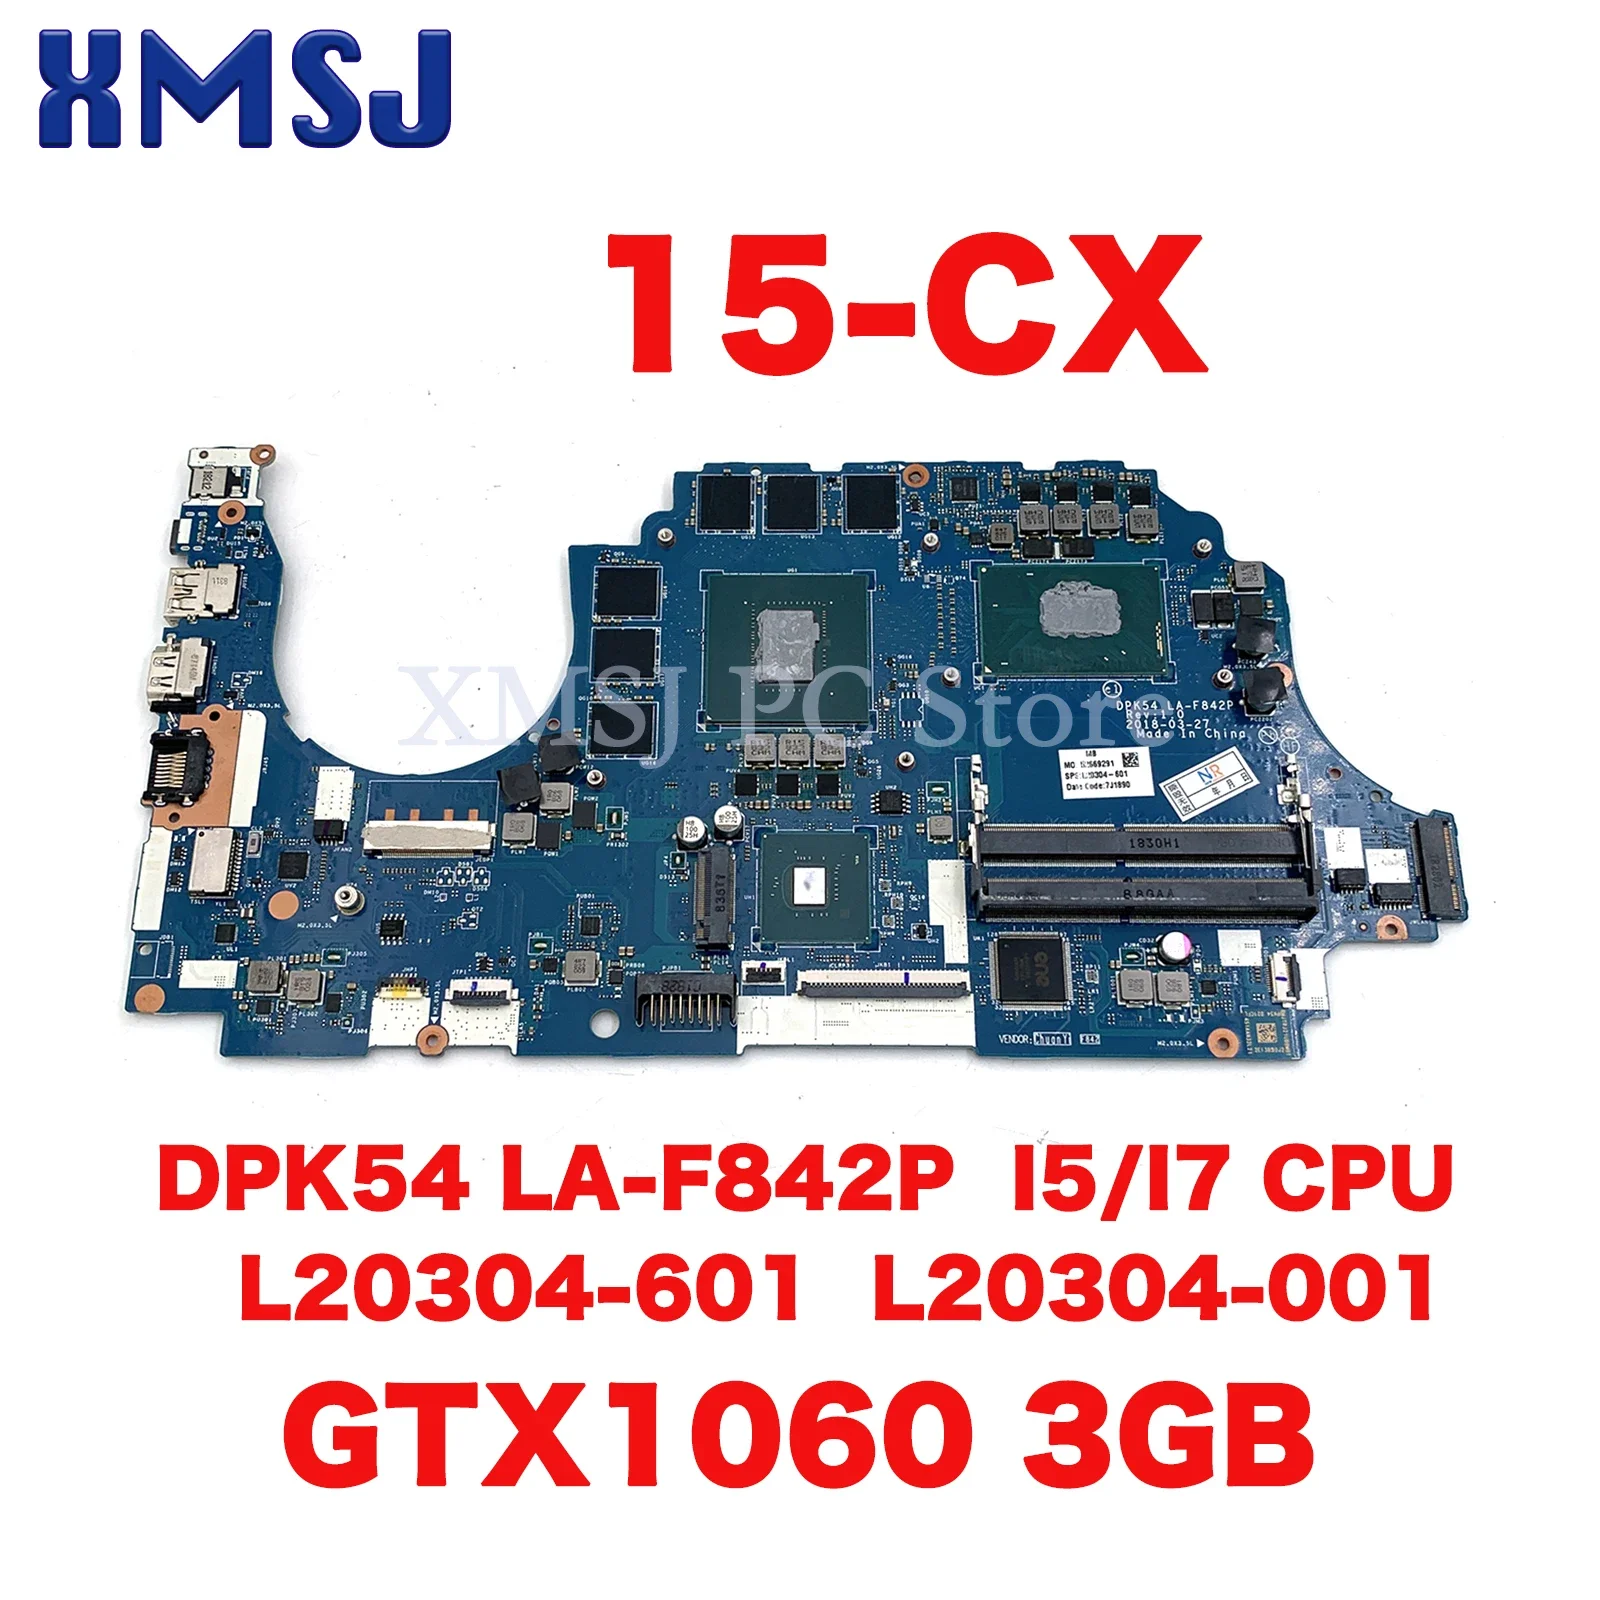 

For HP Pavilion Gaming 15-CX Series Laptop Motherboard DPK54 LA-F842P L20304-601 L20304-001With I5/I7 CPU GTX1060 3GB